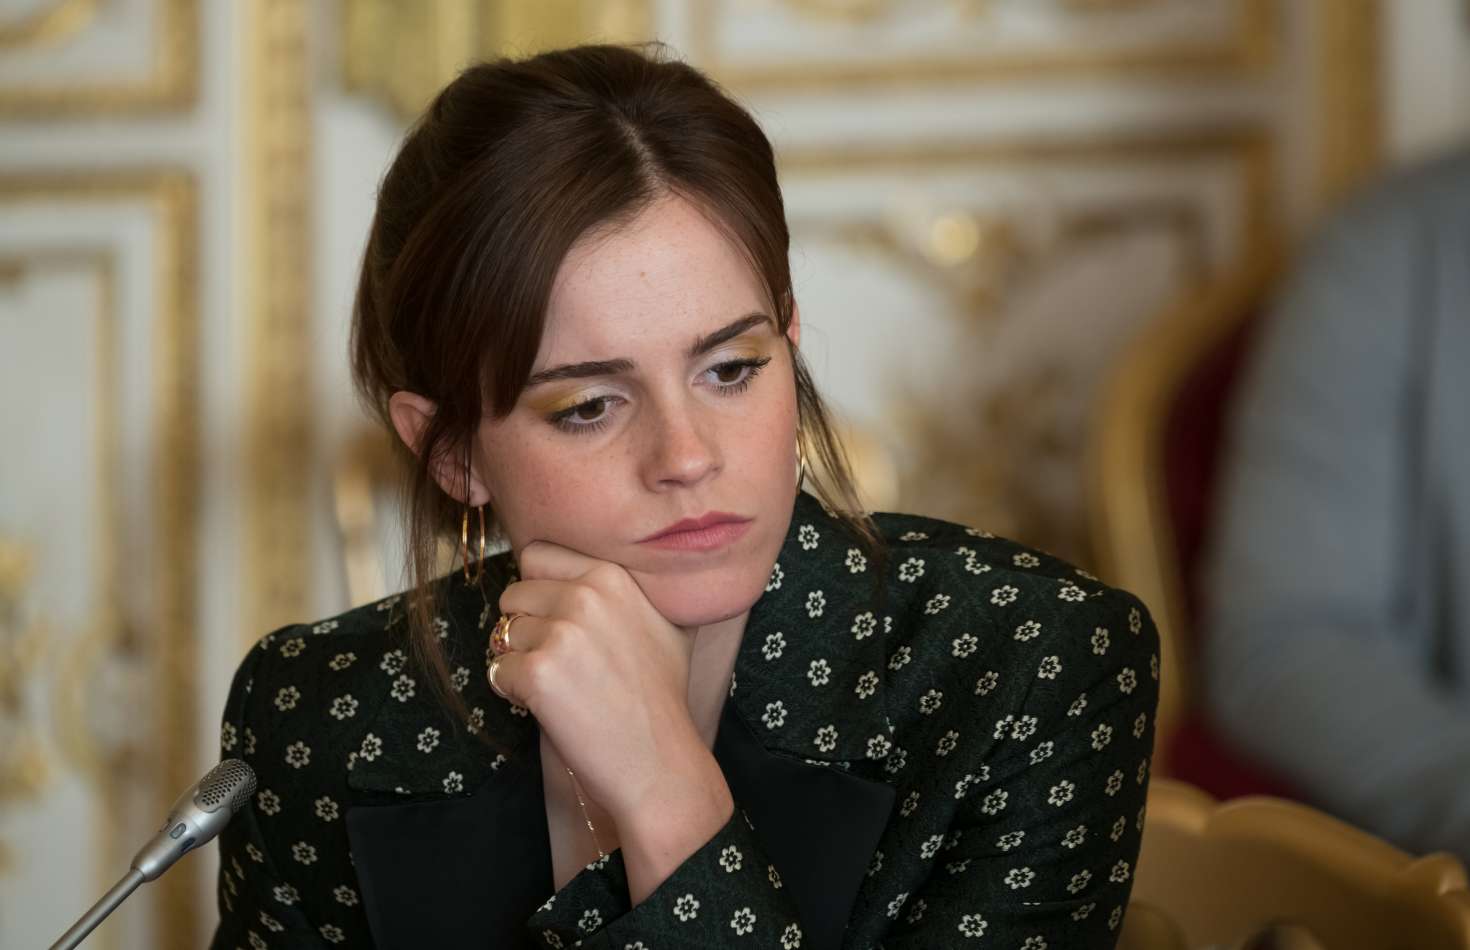 Emma Watson â€“ First Meeting of the G7 Gender Equality Advisory Council in Paris